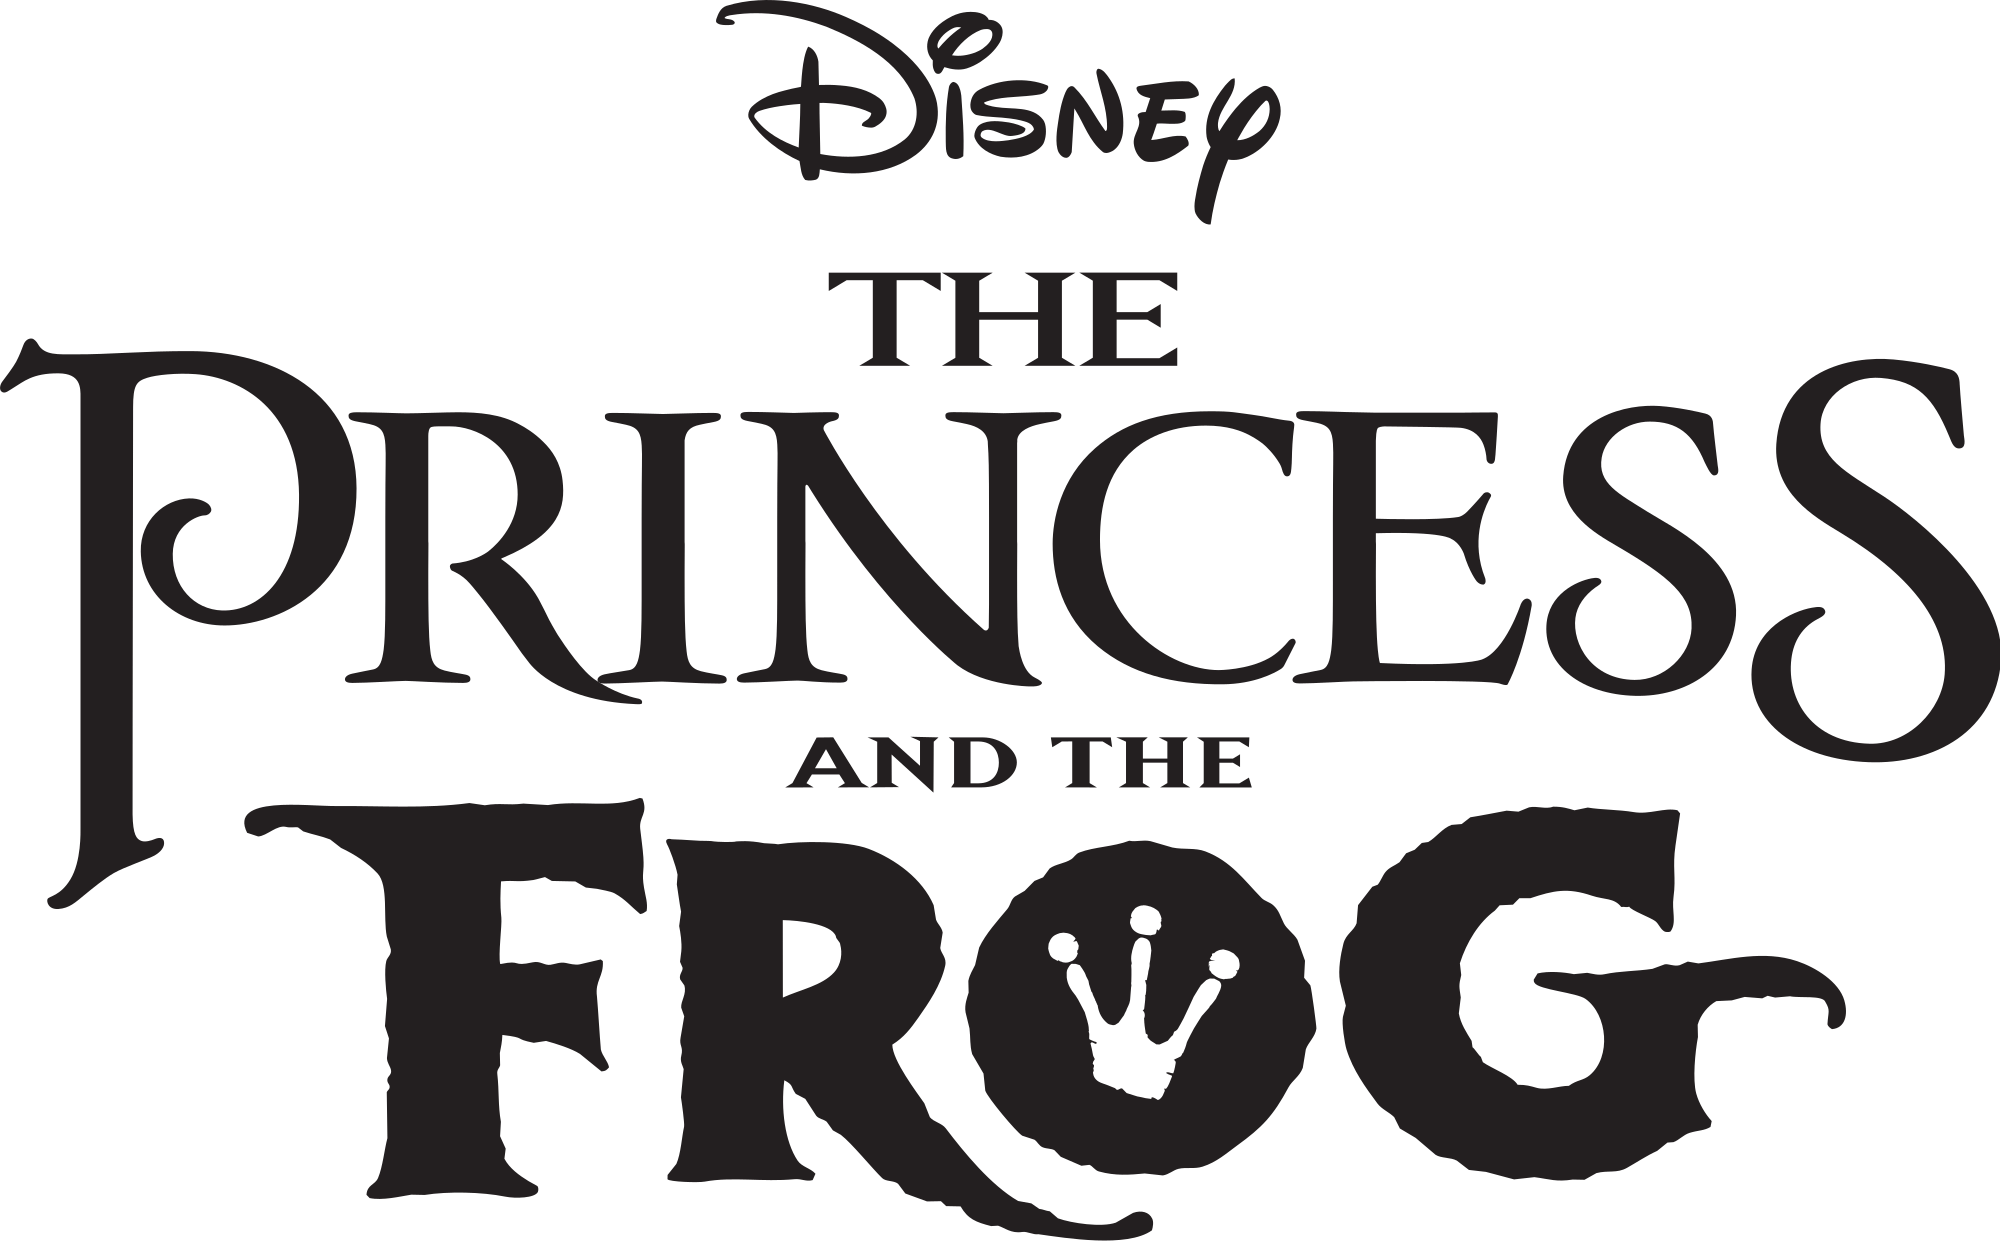 White and Black Frog Logo - File:The Princess and the Frog Logo Black.svg - Wikimedia Commons